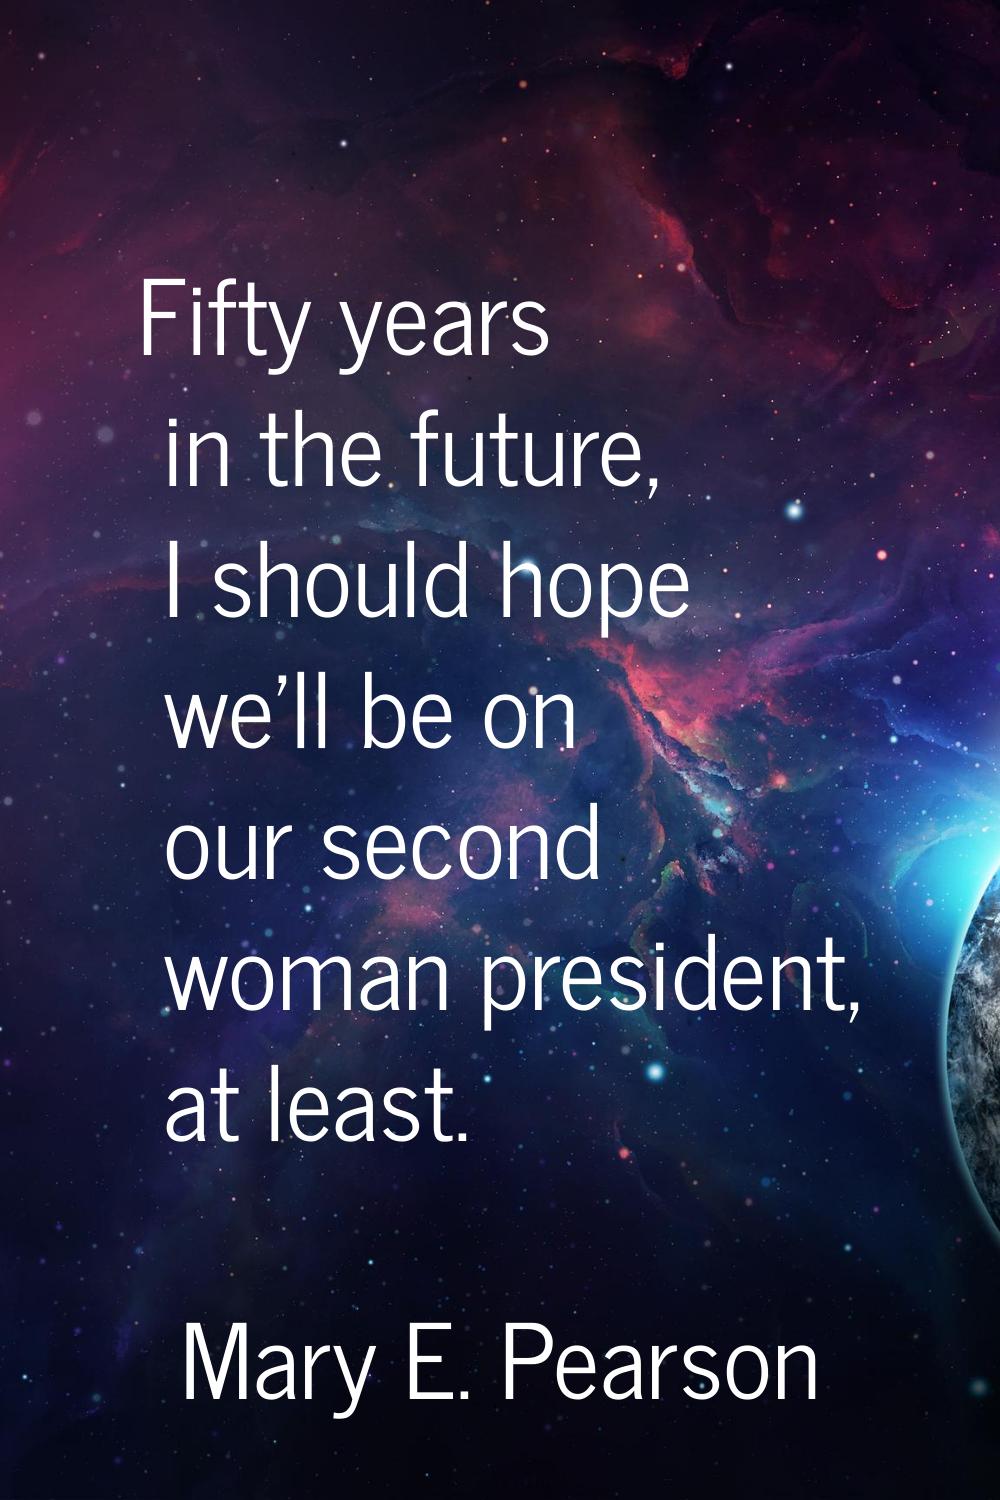 Fifty years in the future, I should hope we'll be on our second woman president, at least.